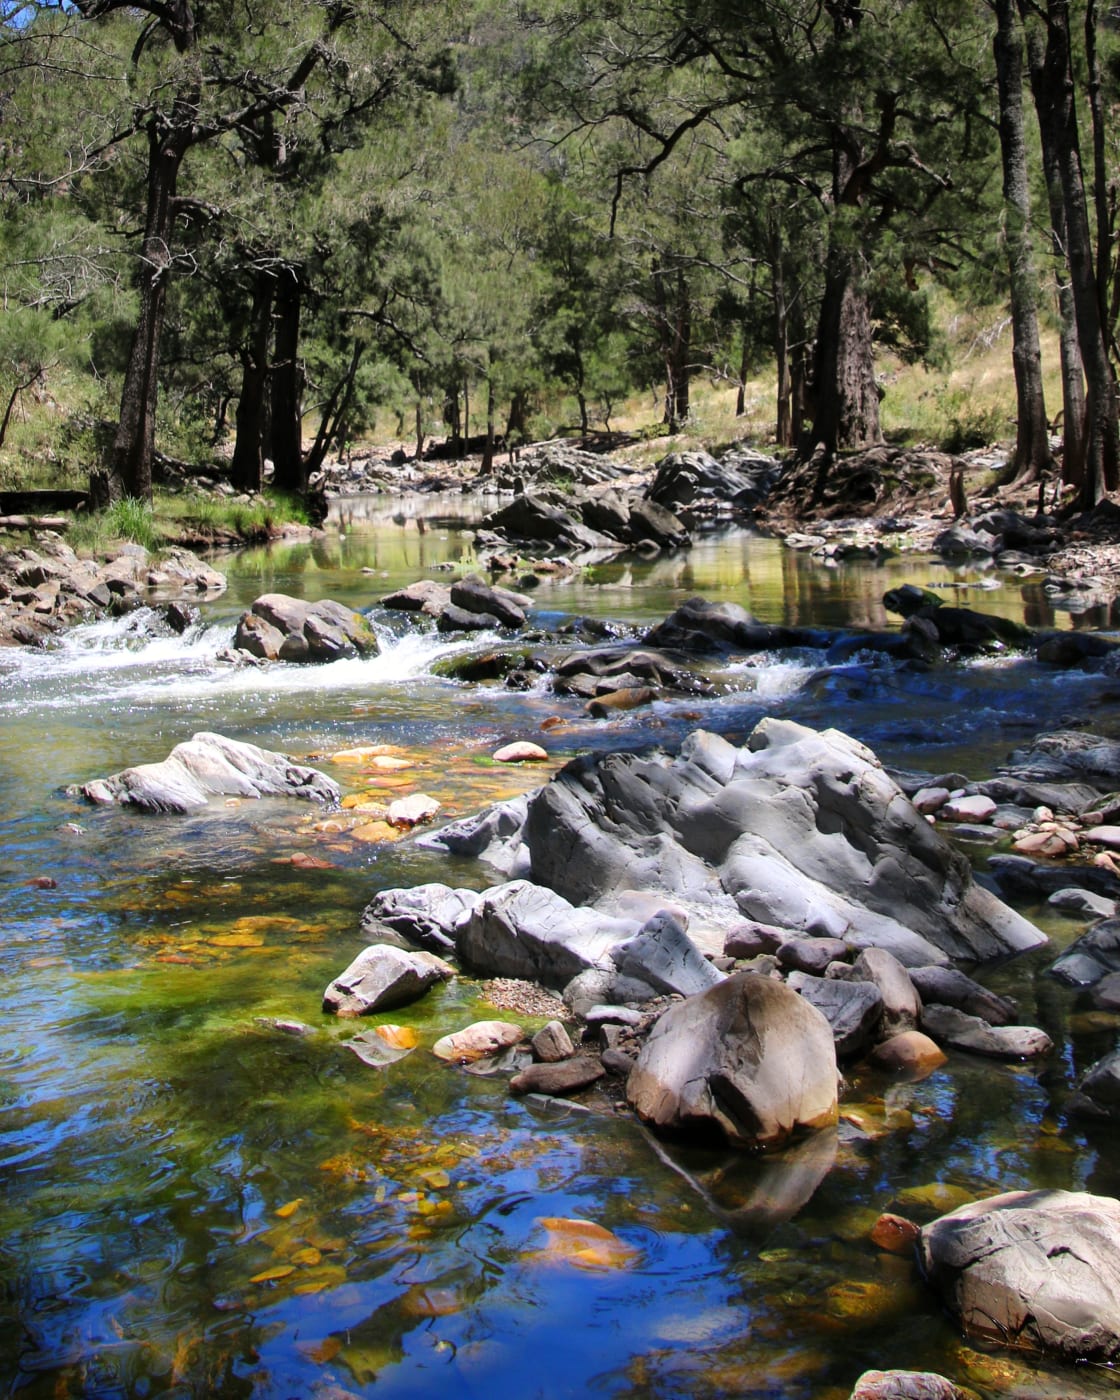 Our creek usually slows down in summer but still has ample swimming holes and places to cool off amongst the fishes. 